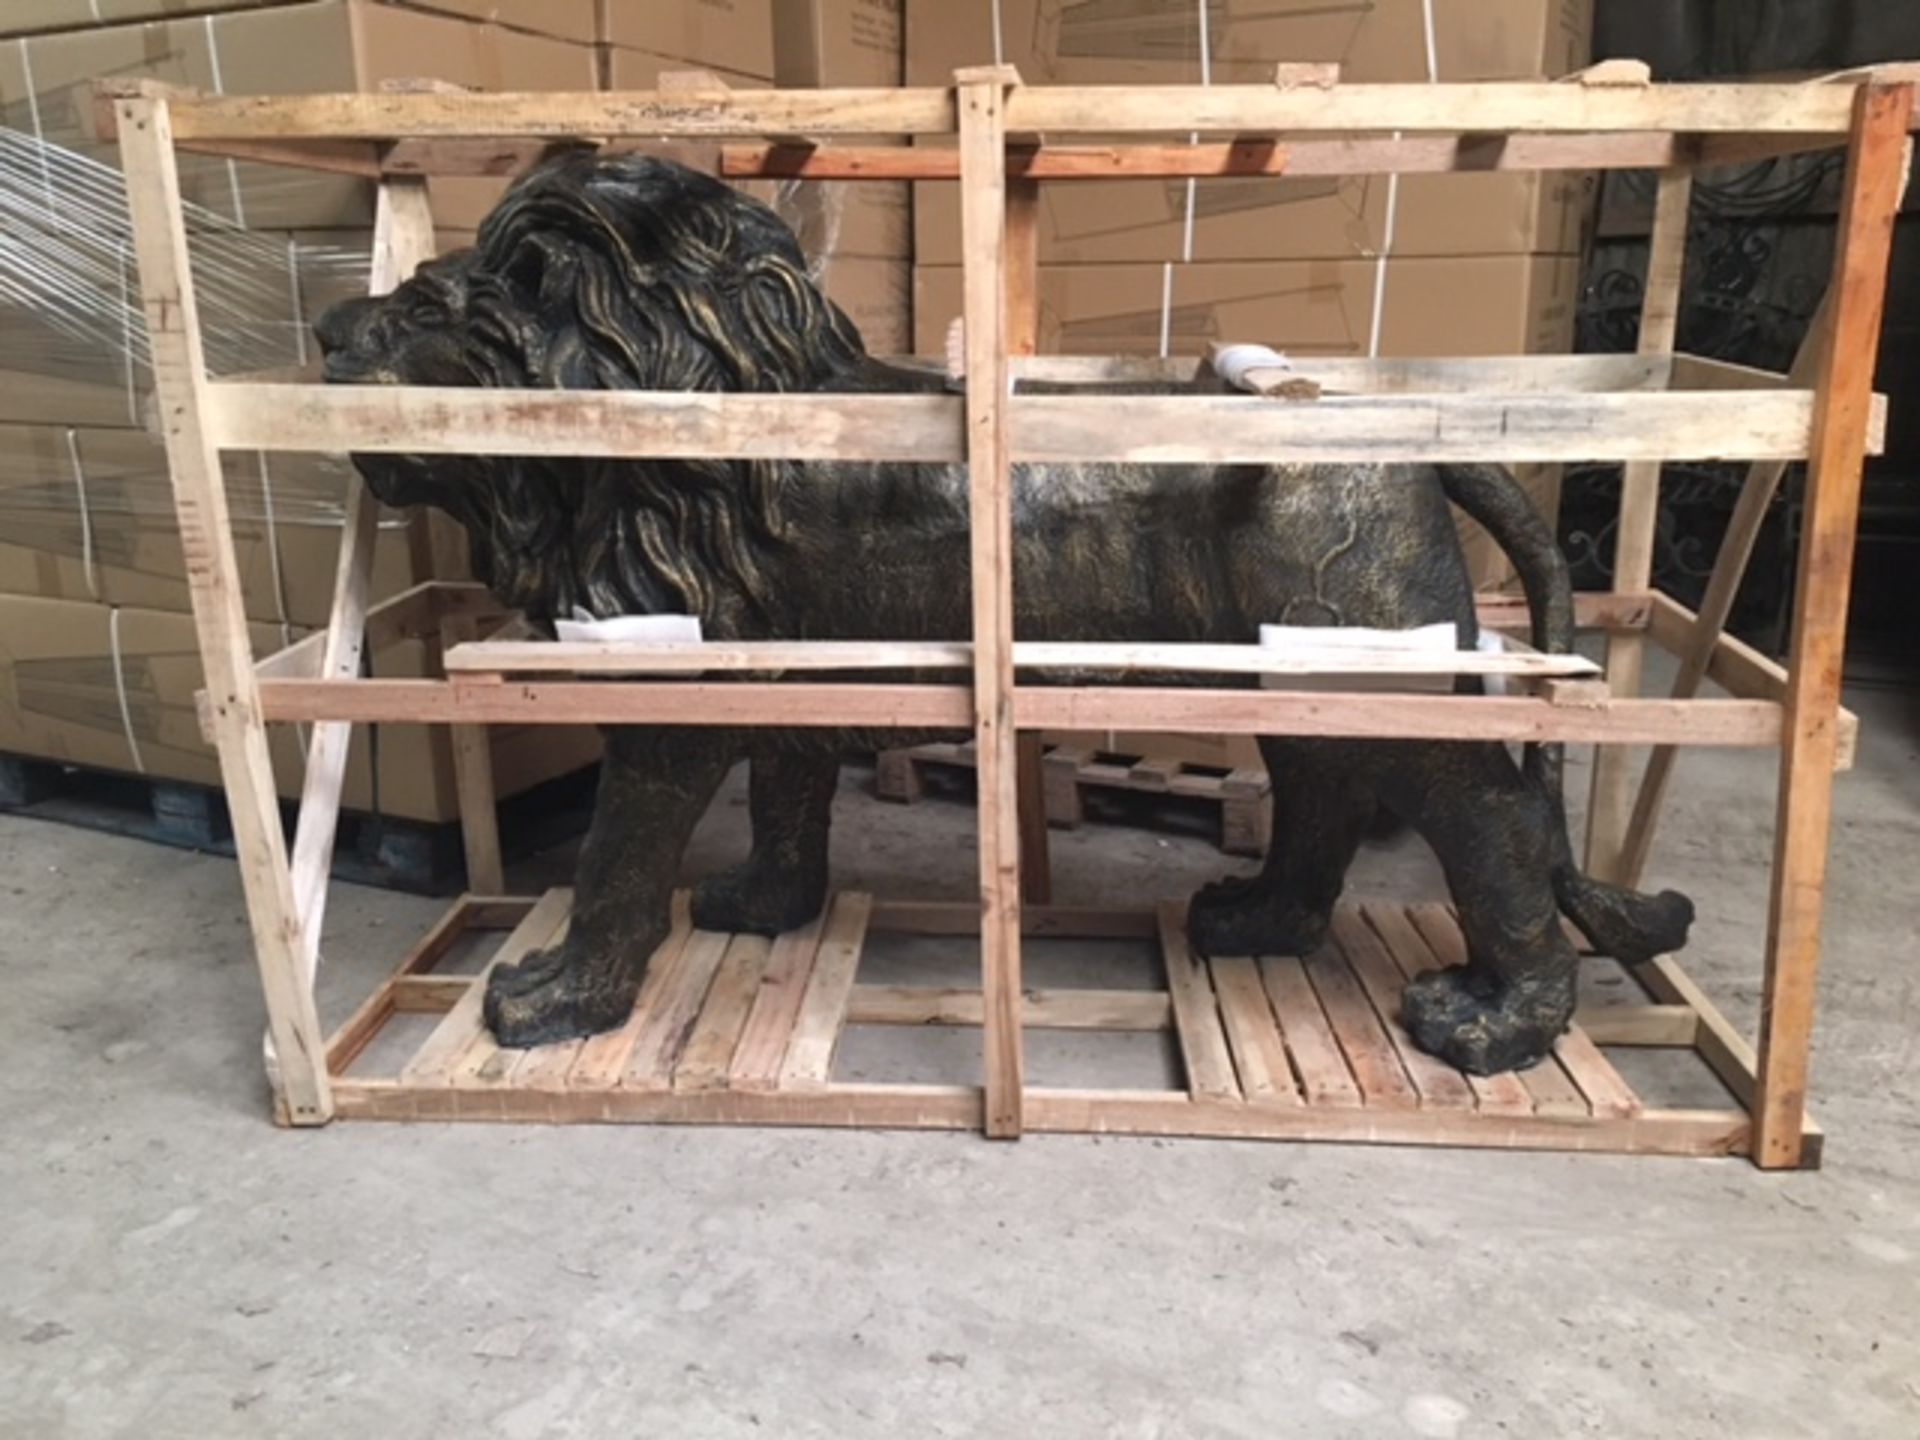 NEW CRATED LARGE LION FIGURE - 6FT LONG FINISHED IN BRONZE